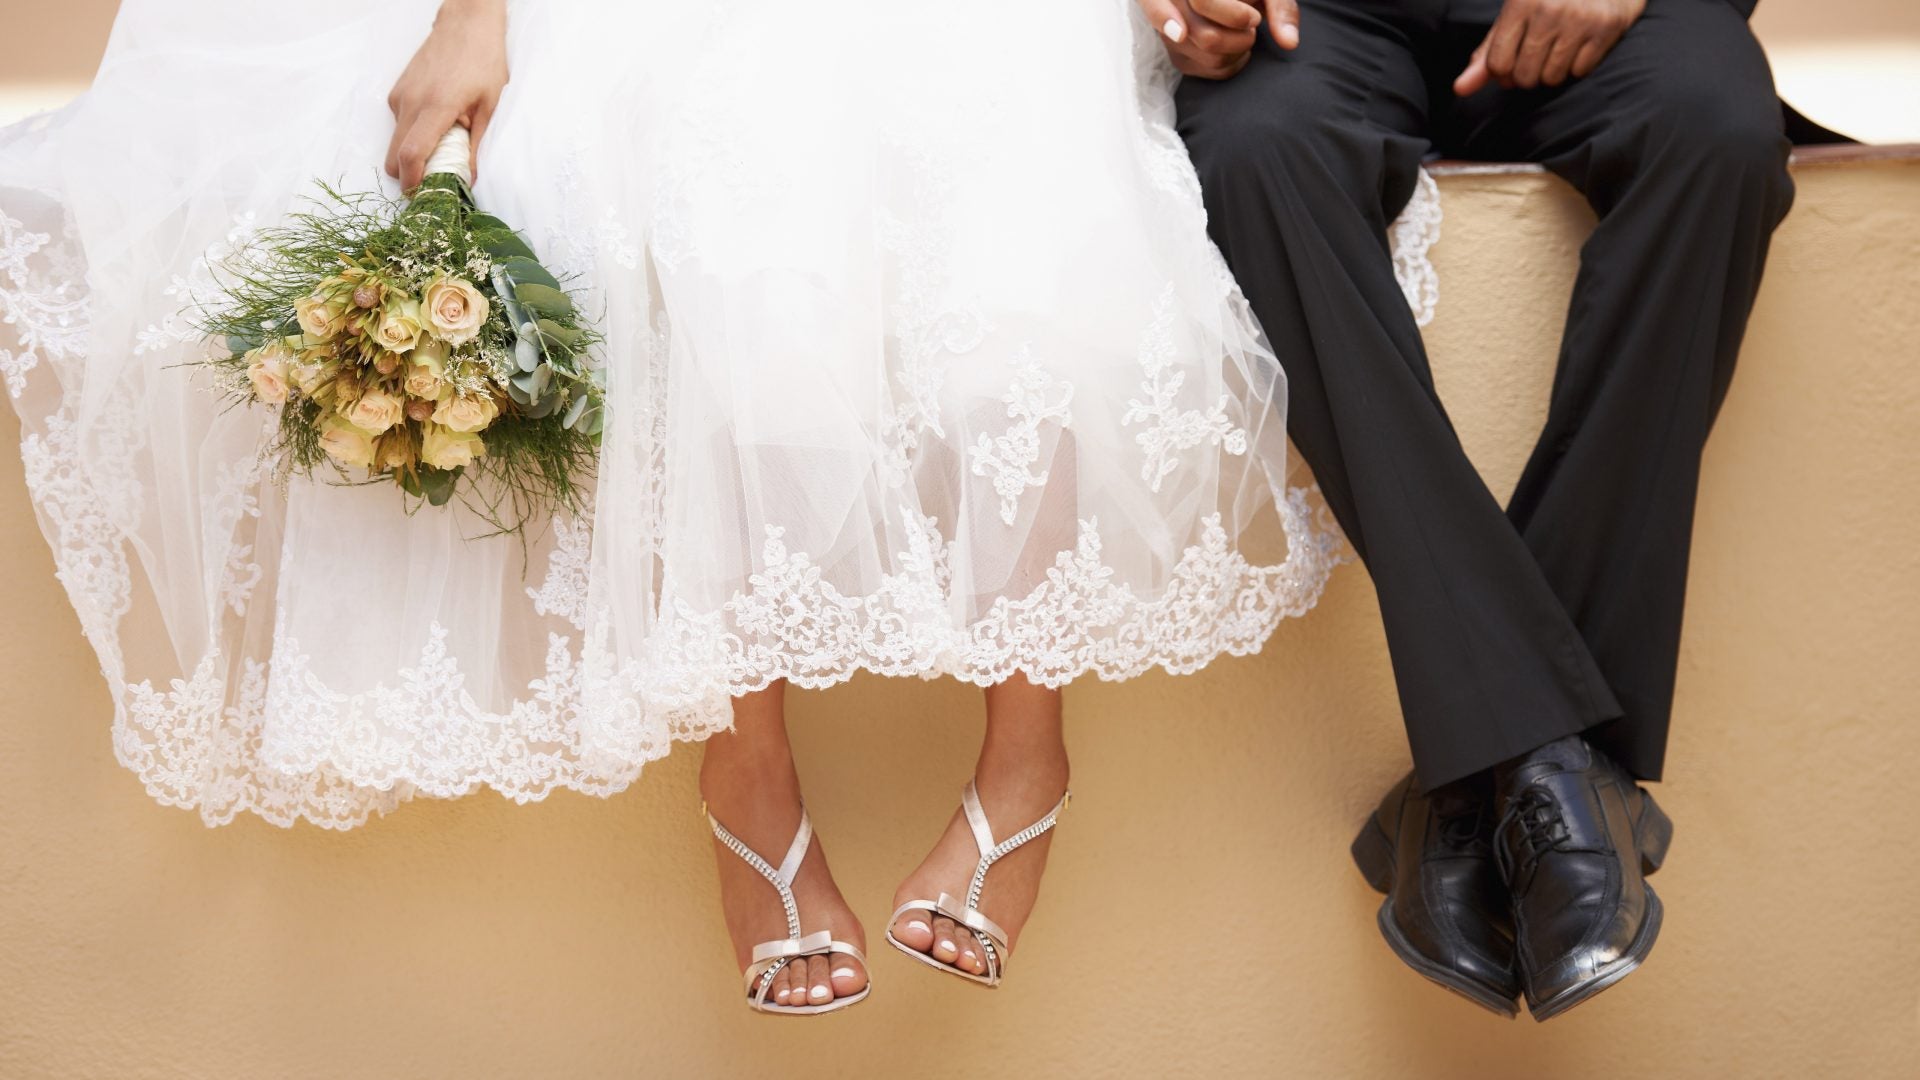 Brides In These States Spend A Year’s College Tuition On Their Wedding